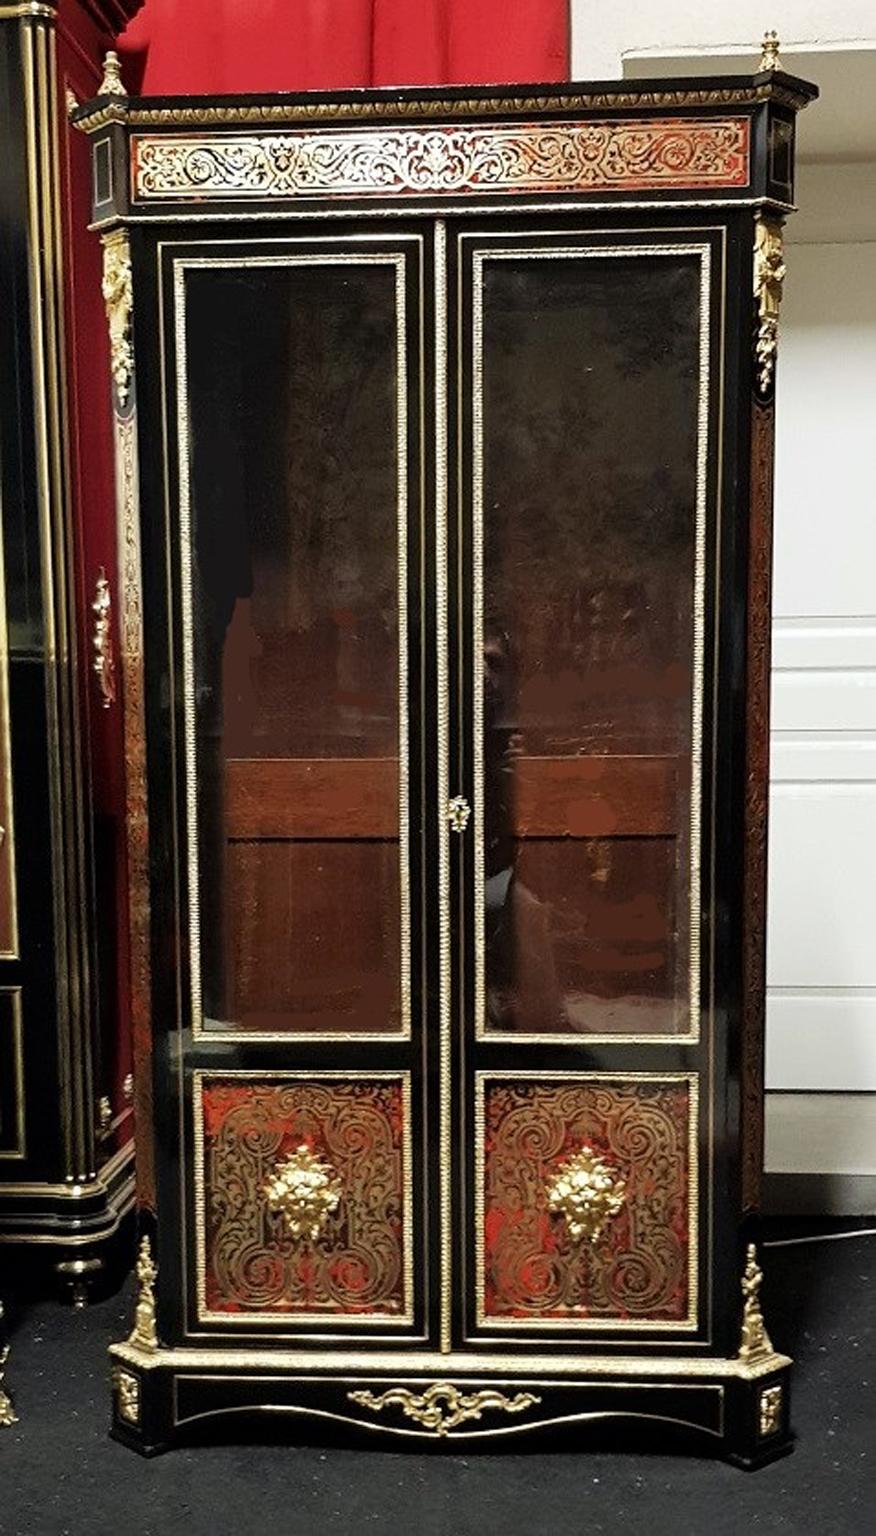 Beautiful Vitrine Bookcase in Boulle style marquetry in brass and tortoise shell, with motifs of foliage, volutes and tracery.
Rich ornamentation of gilt bronze and masks of Faun on the doors.
The interior side is in mahogany with 4 adjustable